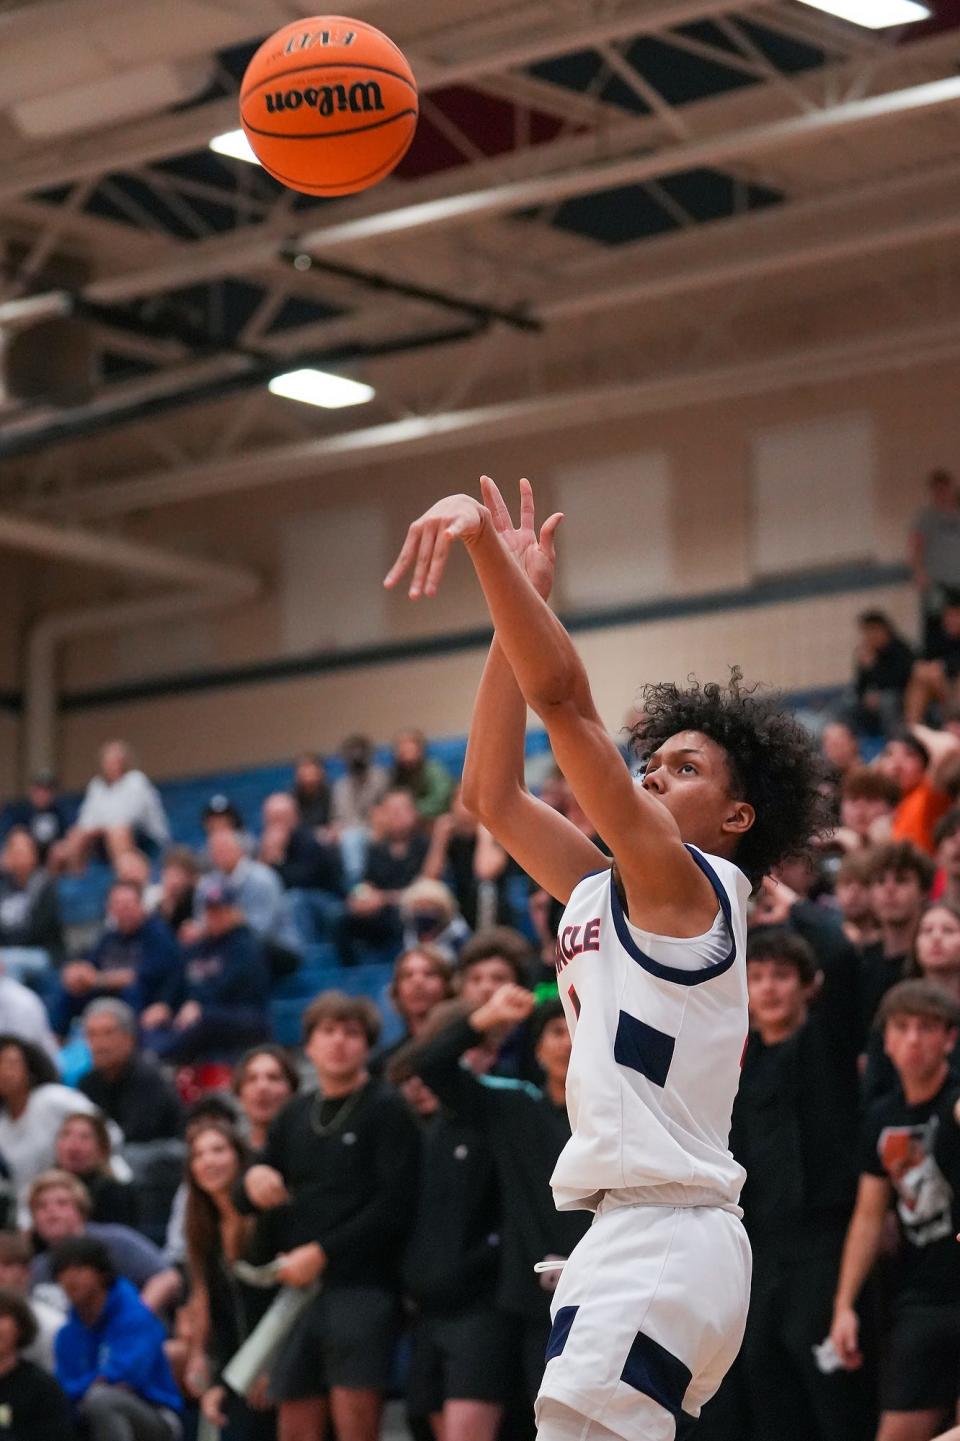 Pinnacle's Bryce Ford (4) scores an open three pointer during the second half against Liberty High School at Pinnacle High School on Thursday, Feb. 17, 2022, in Phoenix. The game finished in a 73 to 58 win to the Pioneers.